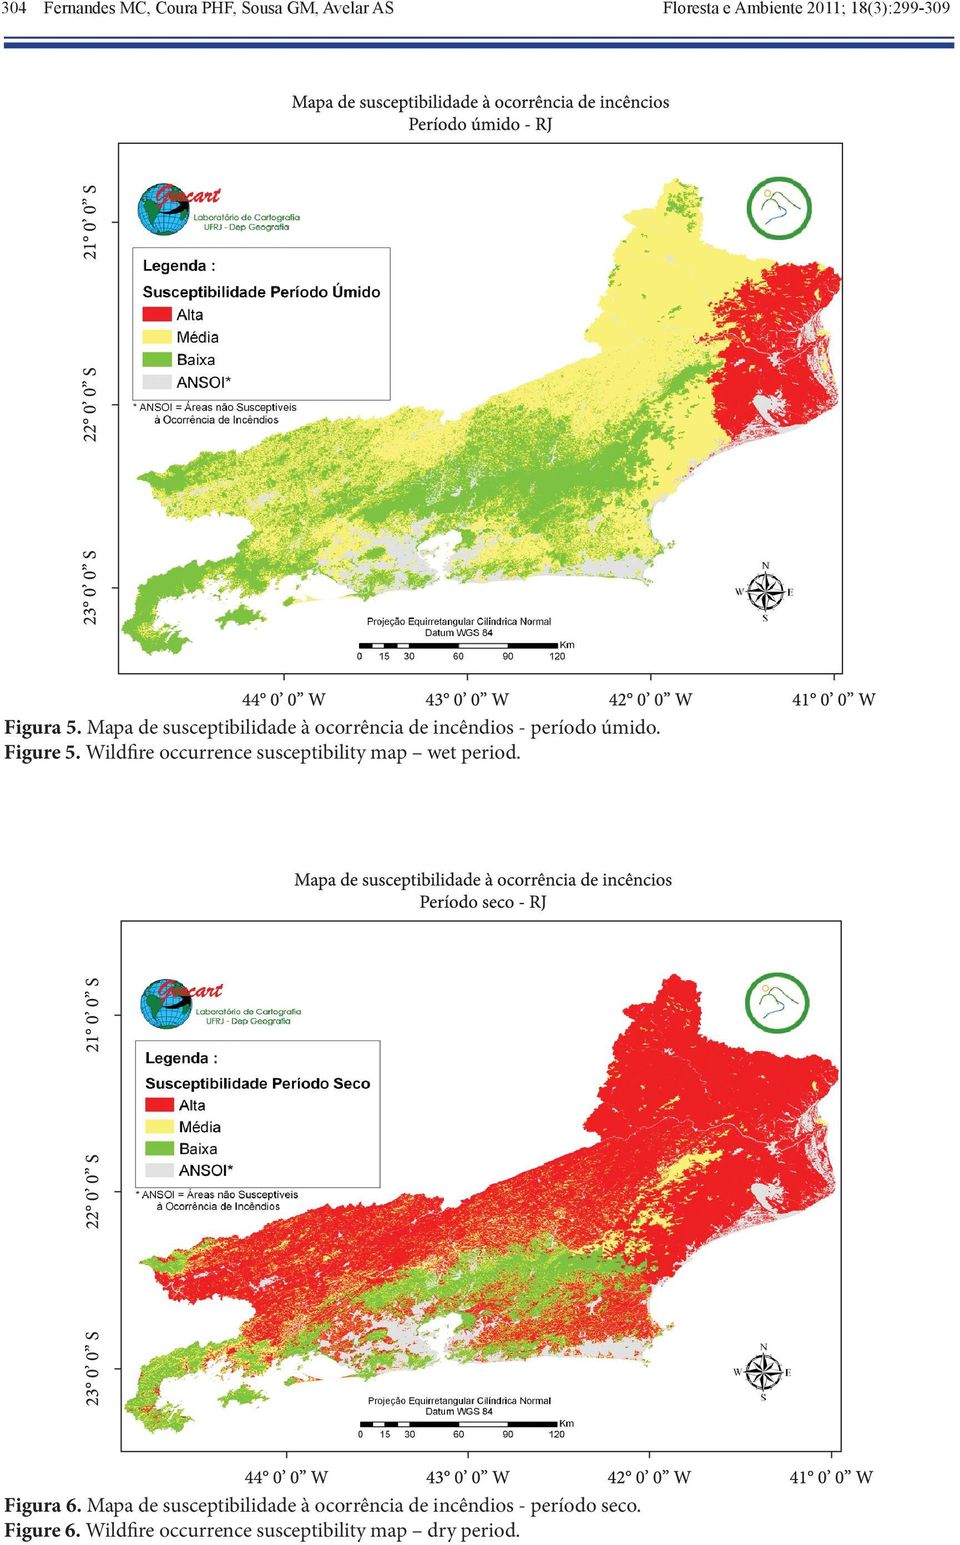 Wildfire occurrence susceptibility map wet period. Figura 6.